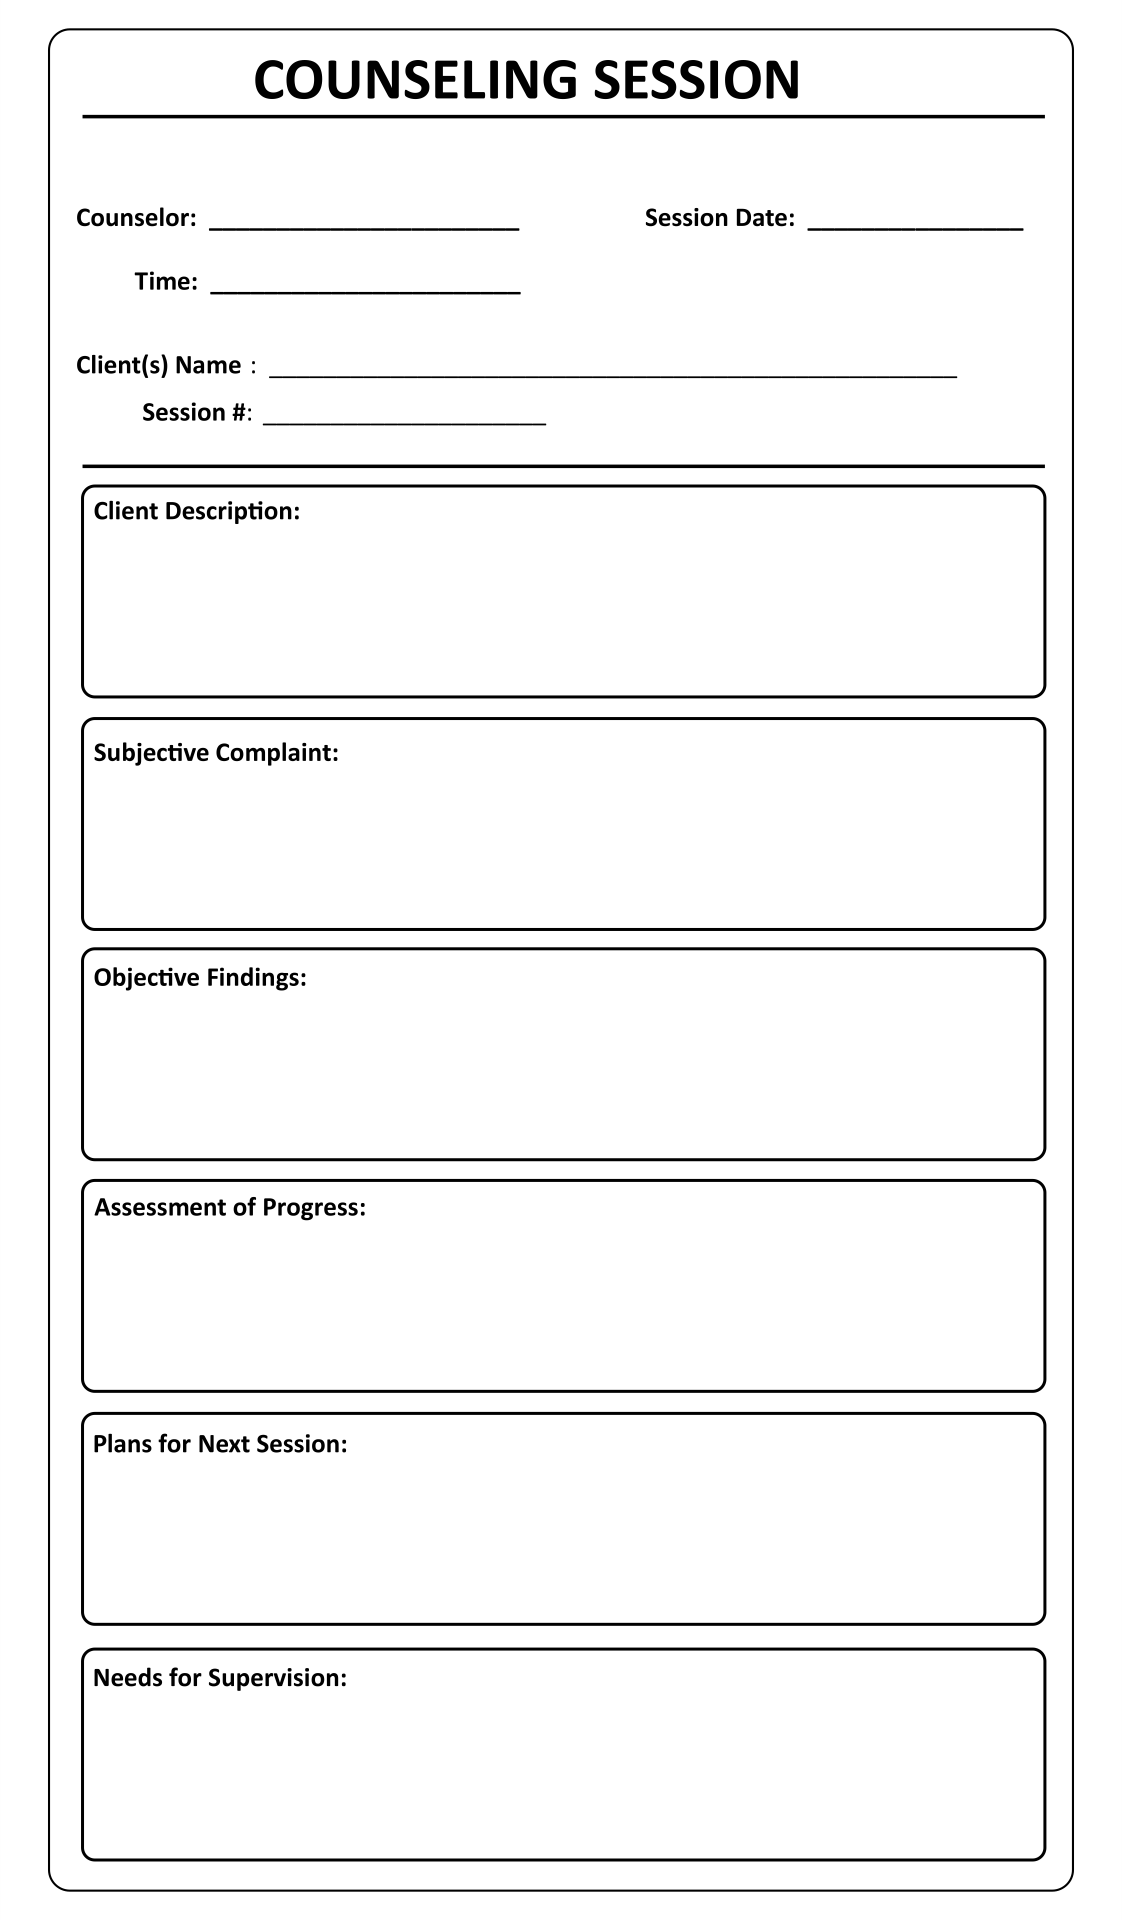 7 Best Images of Printable Counseling Soap Note Templates Counseling